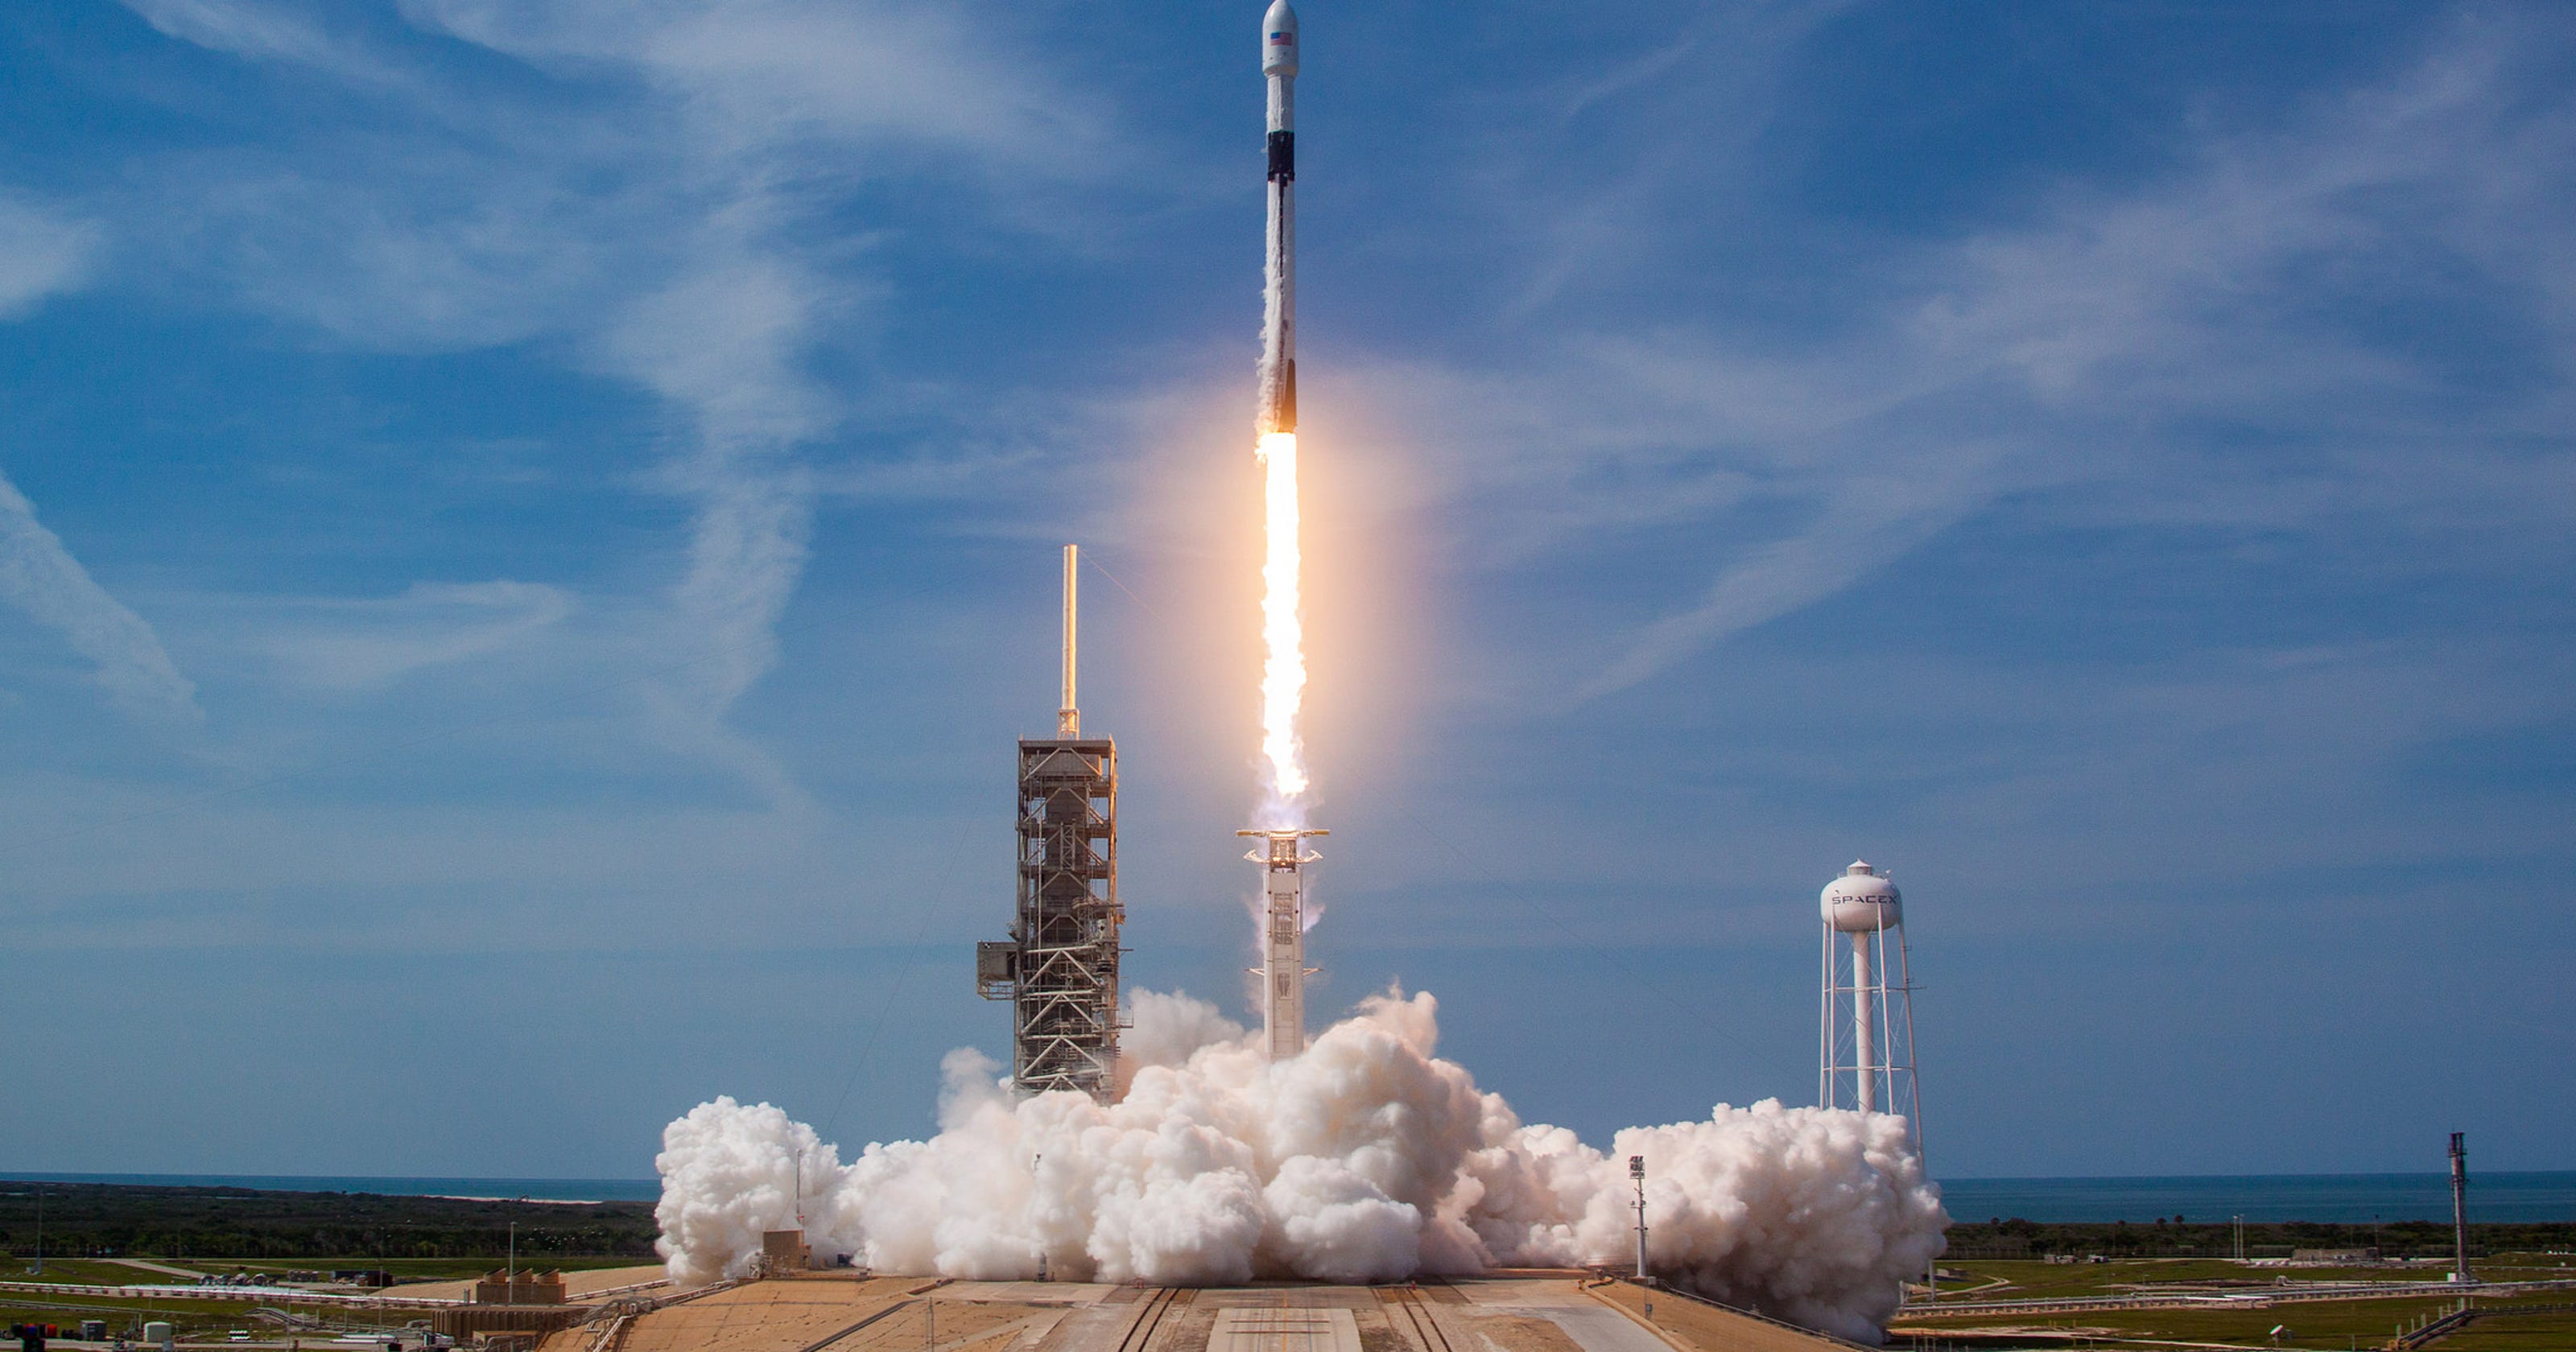 How to watch tonight's SpaceX Falcon 9 launch from Cape Canaveral3200 x 1680